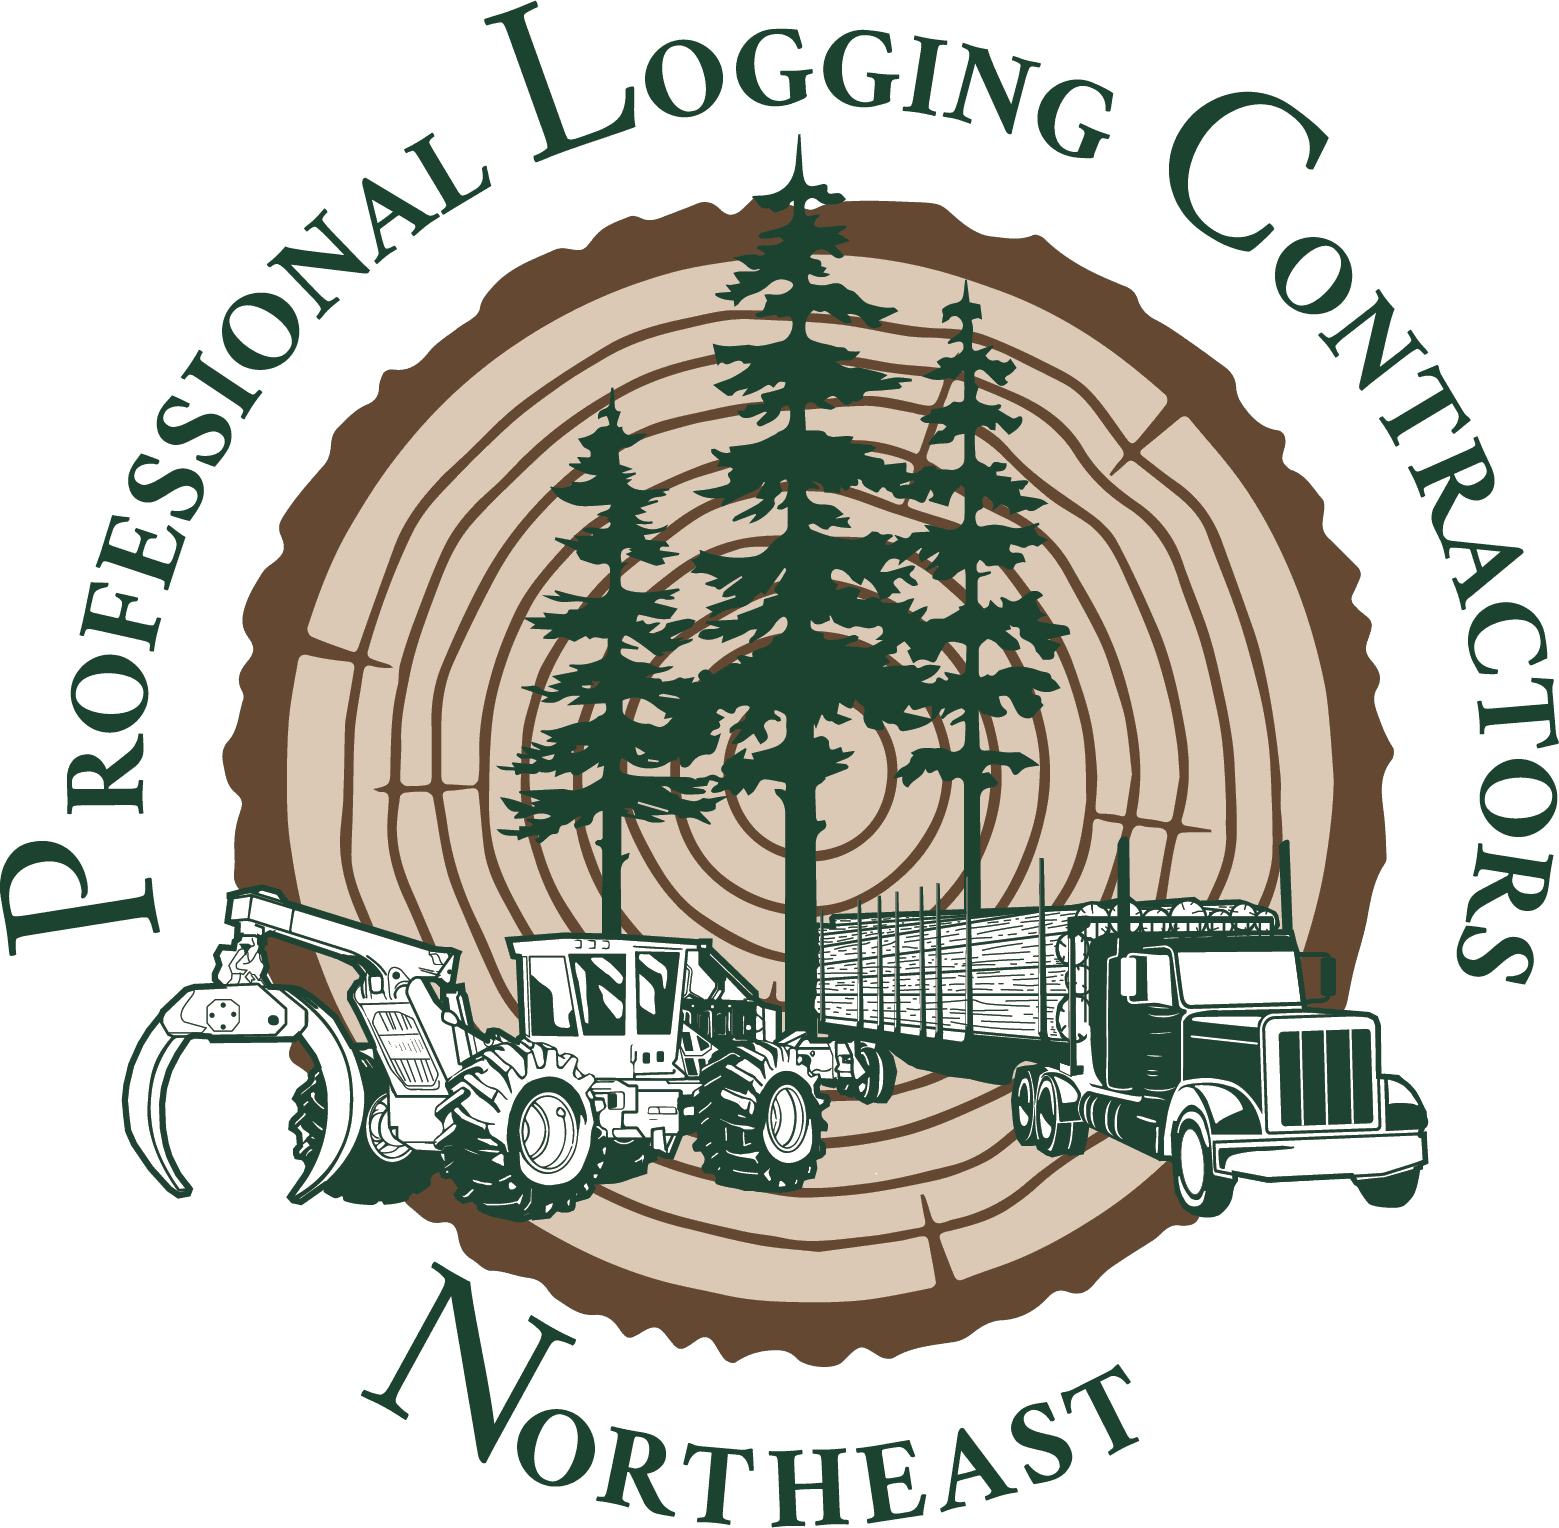 Professional Logging Contractors of the Northeast